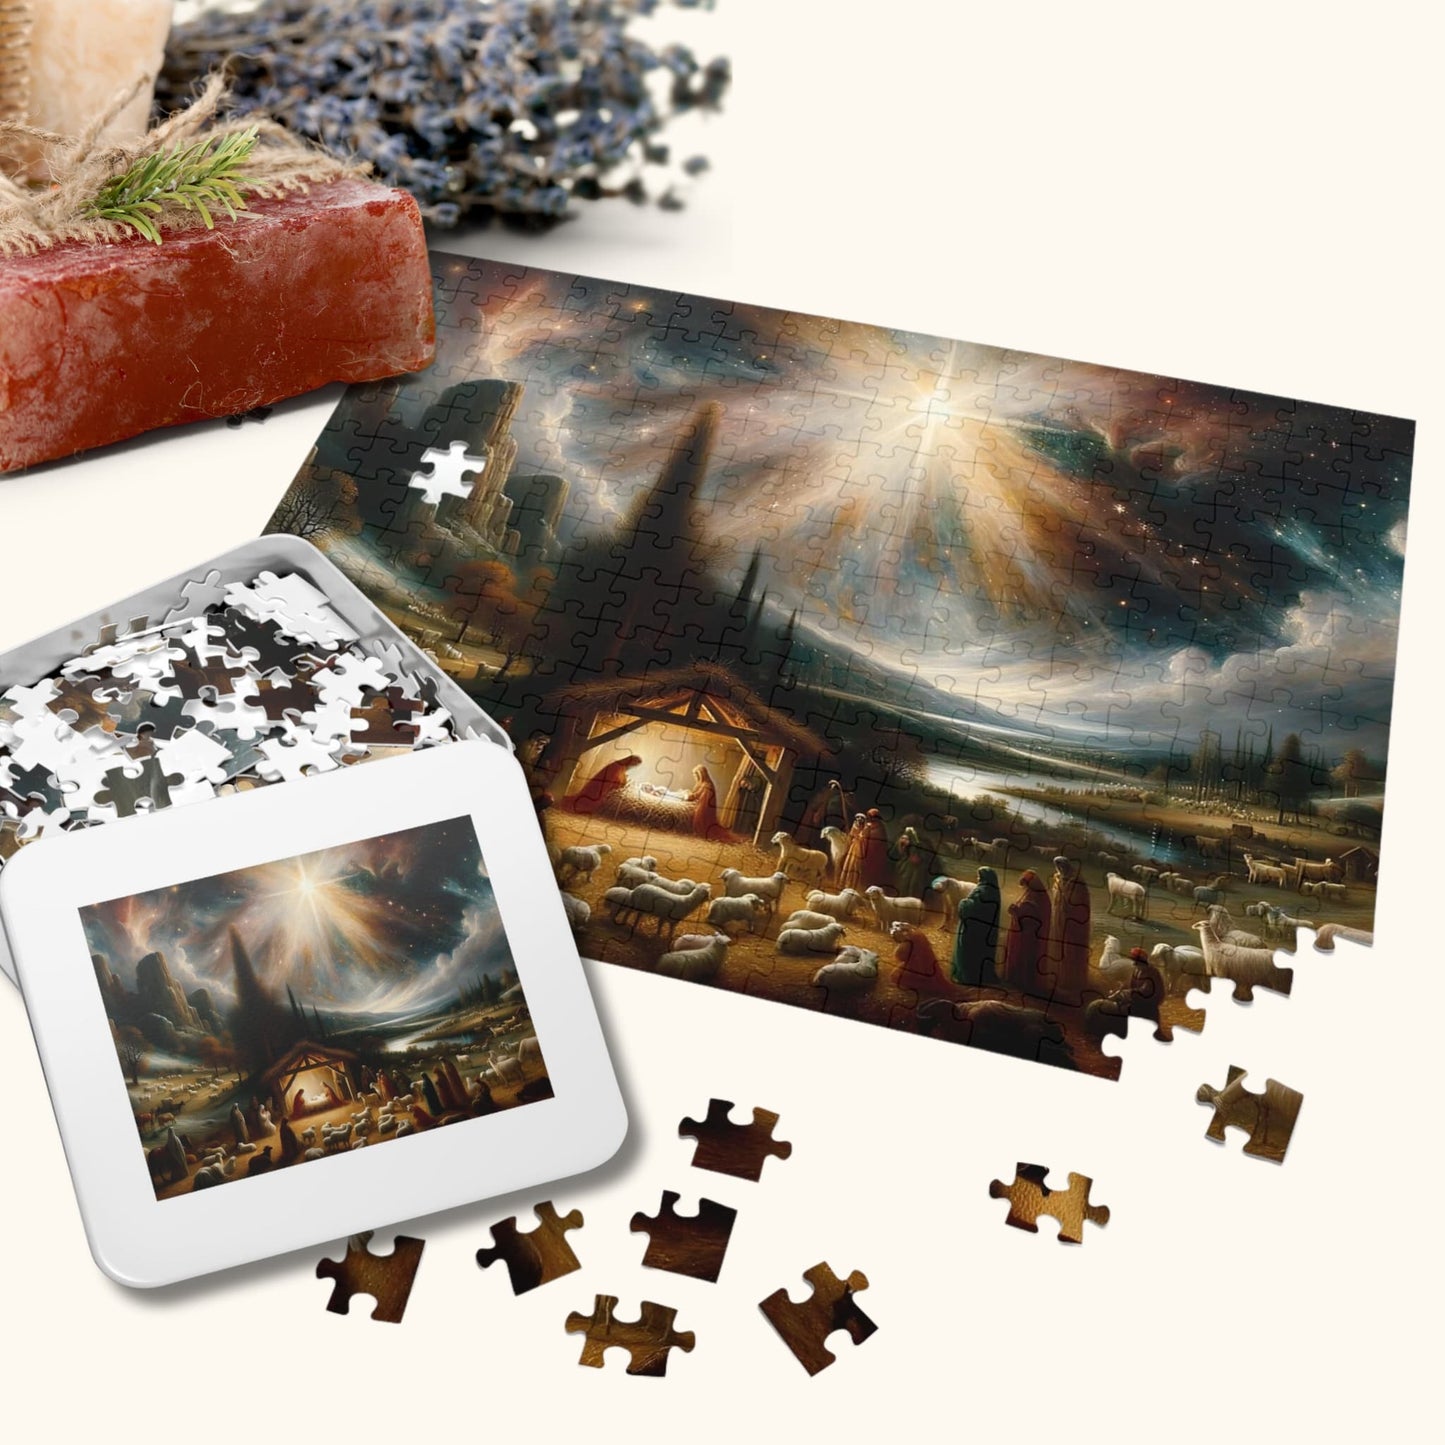 Oil-Painted Nativity Scene Jigsaw Puzzle alongside its tin box, adorned with flowers.